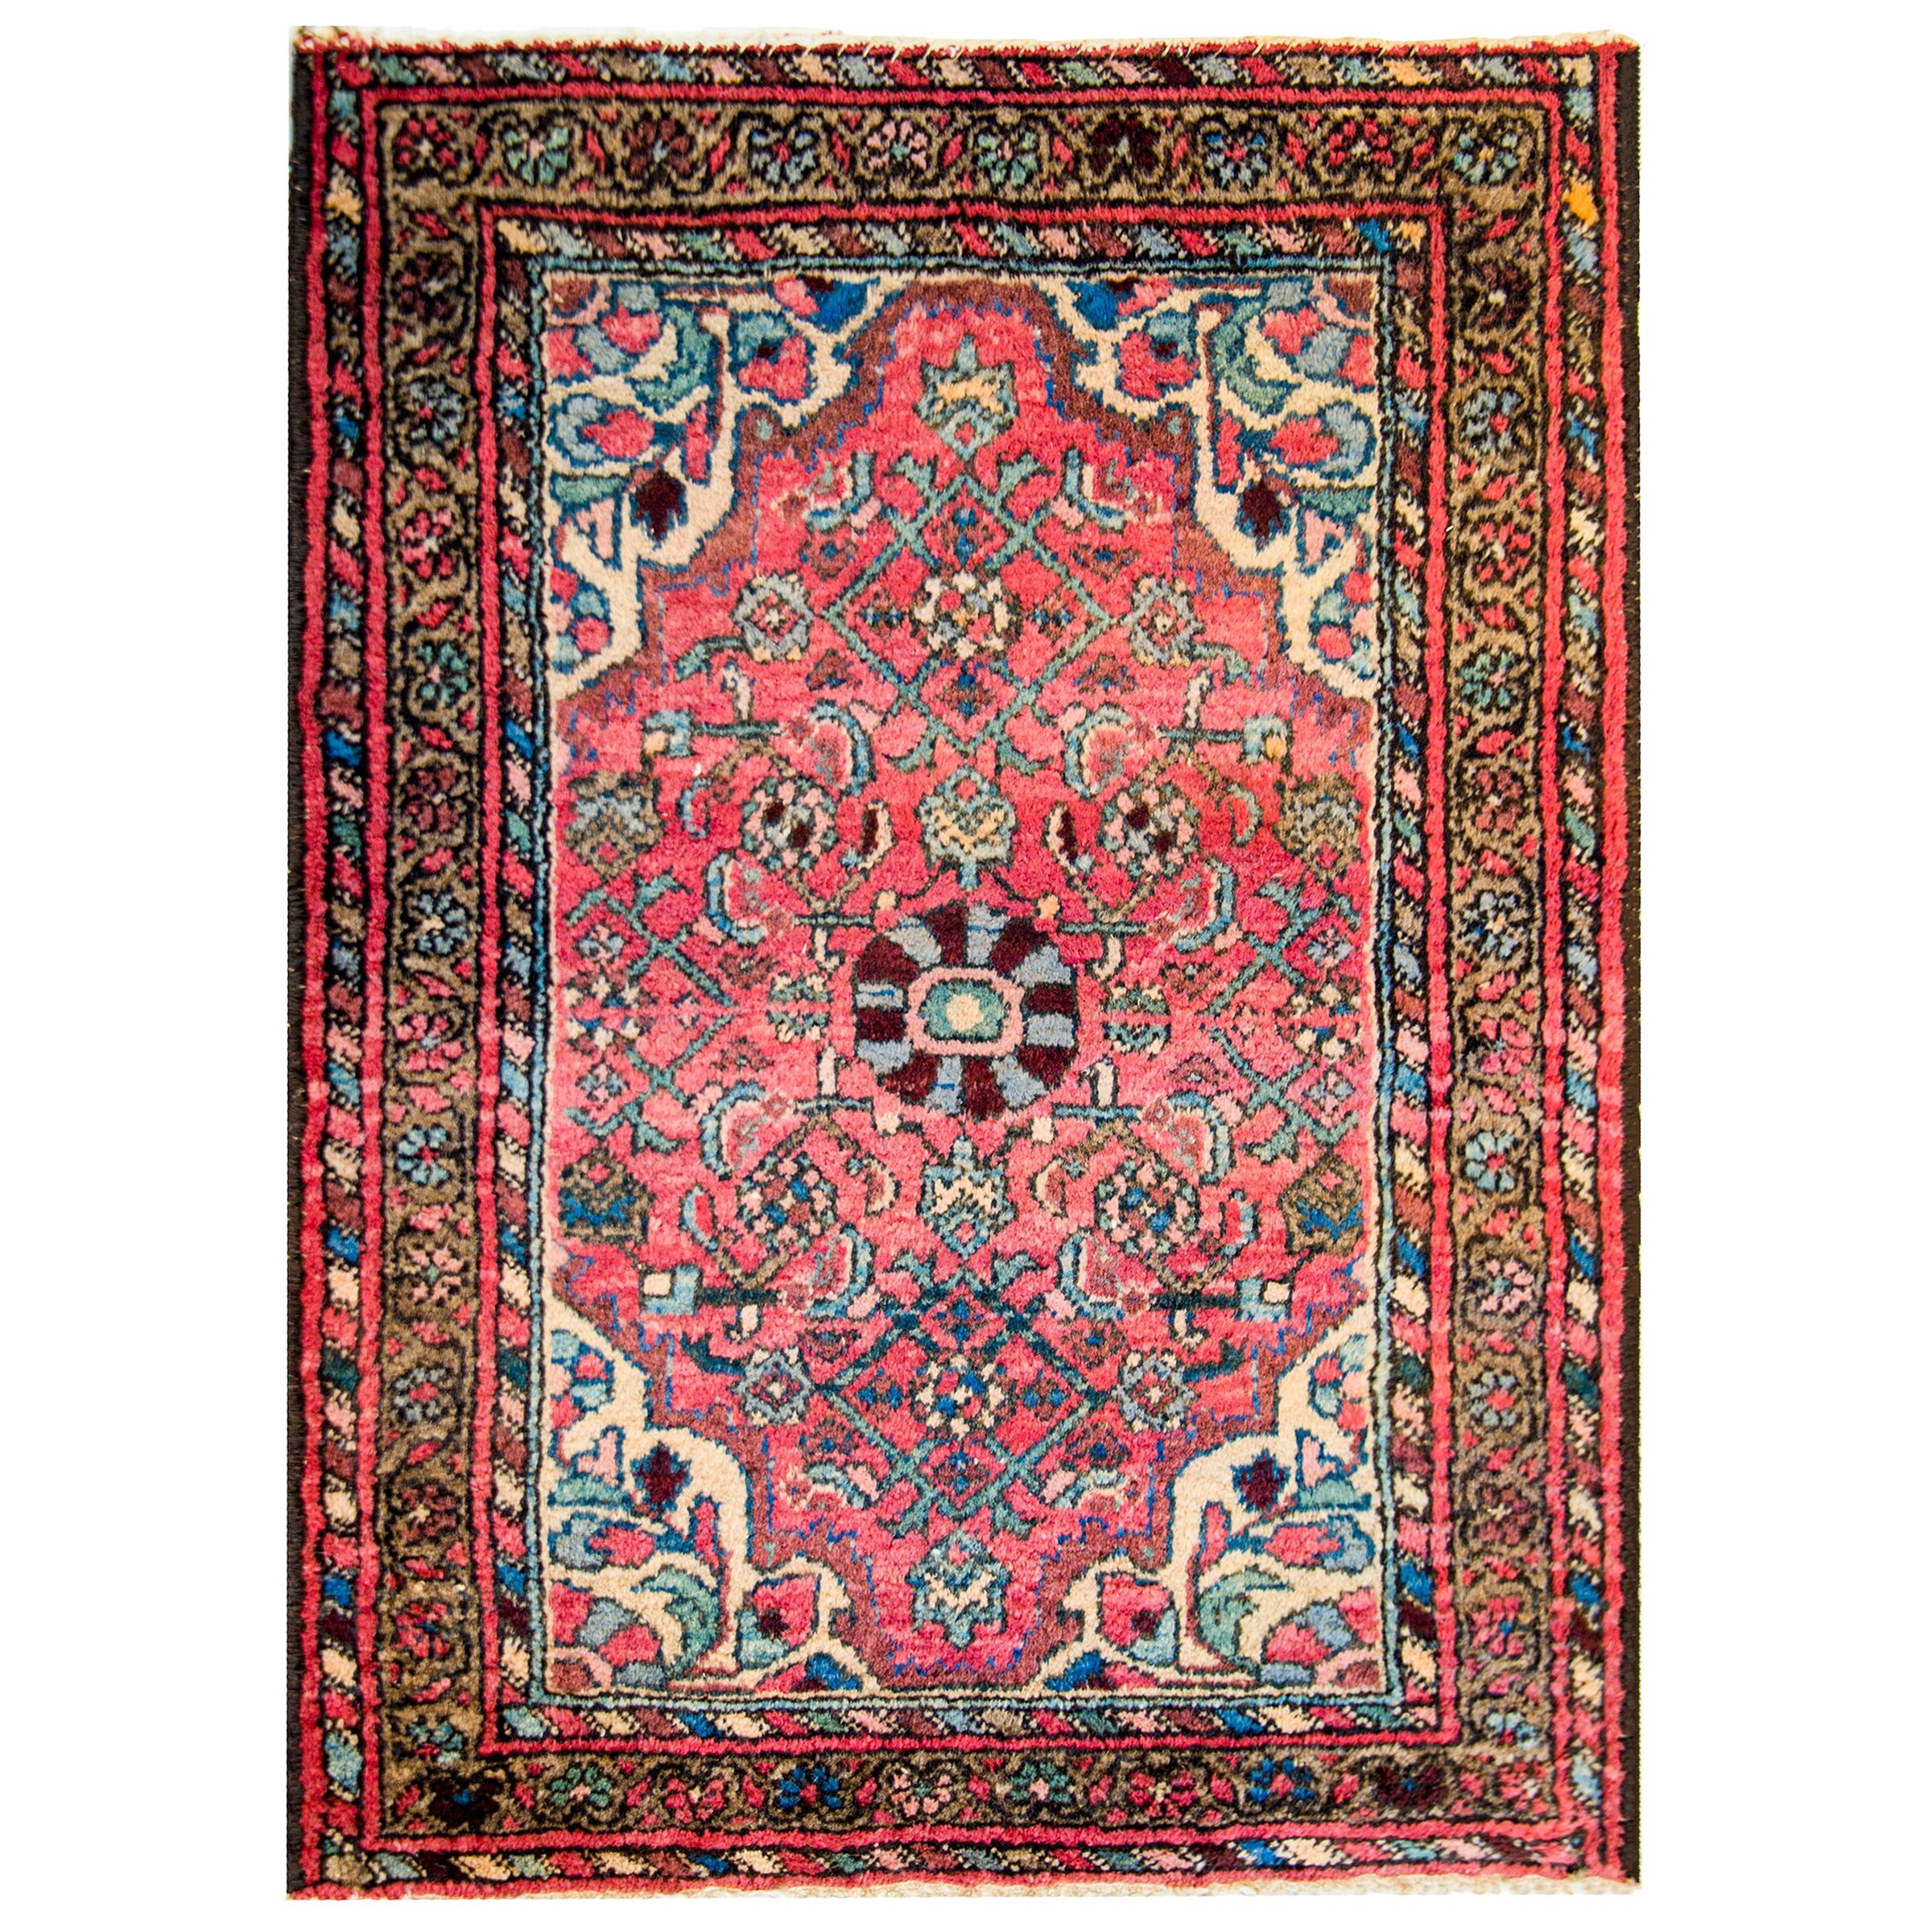 Early 20th Century Malayer Rug